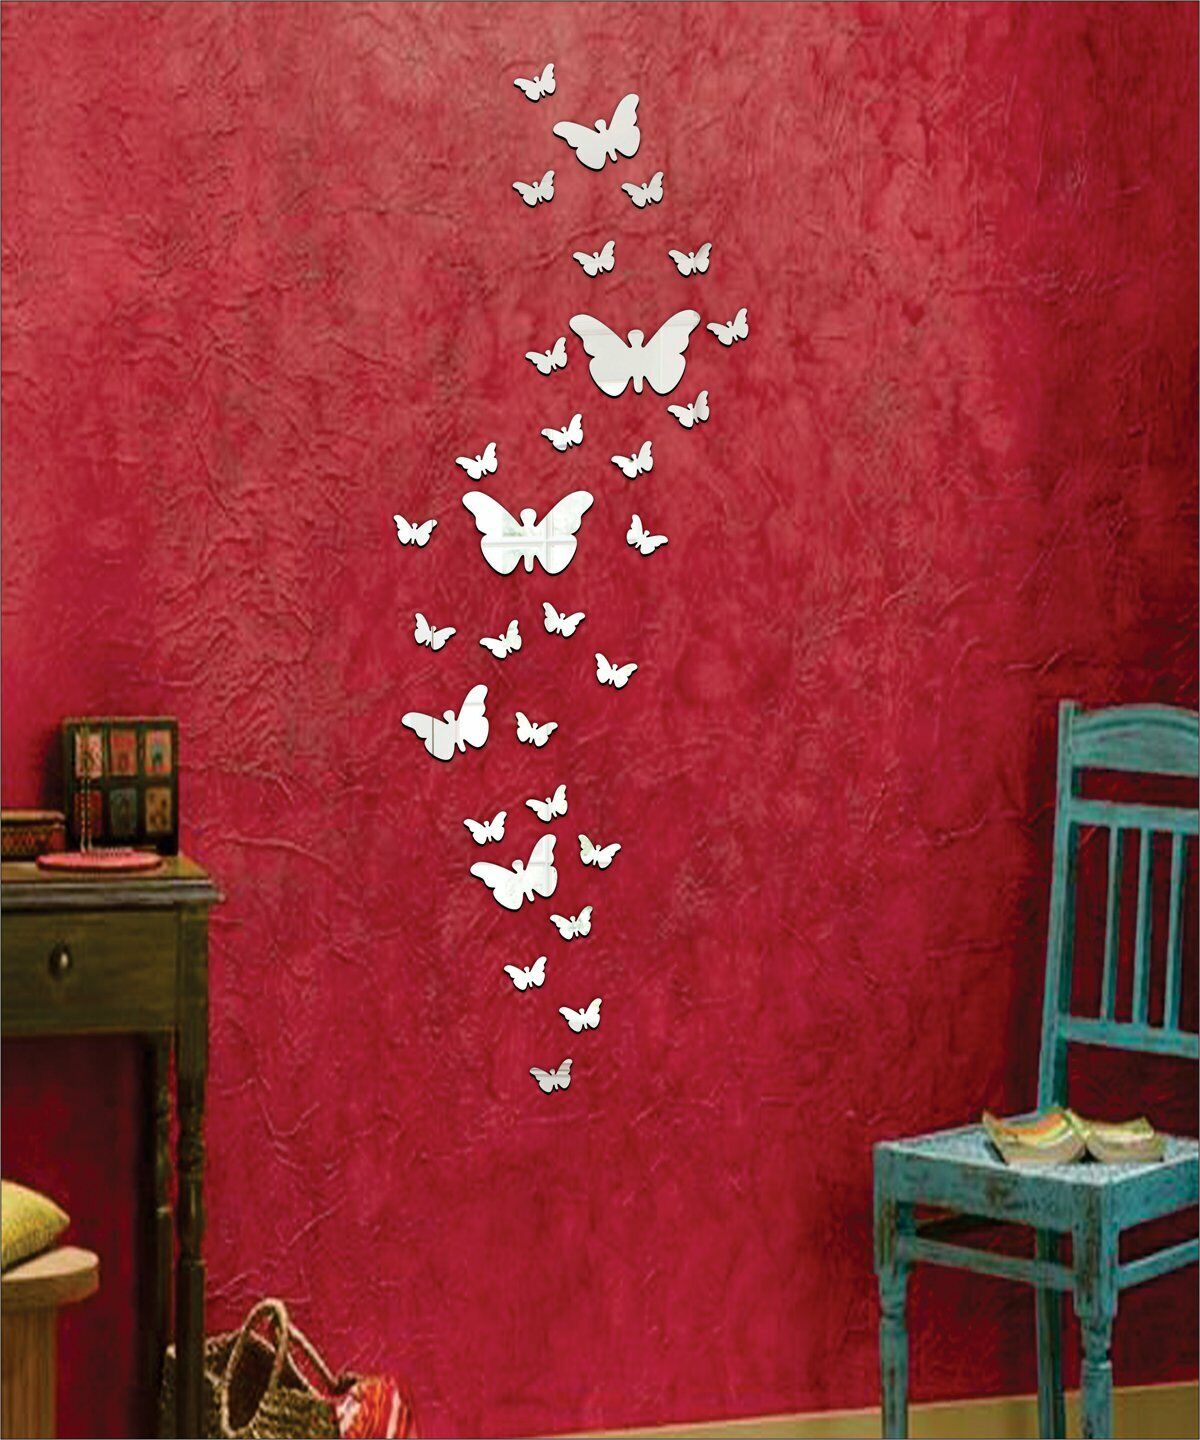 Butterfly Silver 3D Wall Stickers Tattoo Acrylic Mirror For Home Office  Decor | eBay